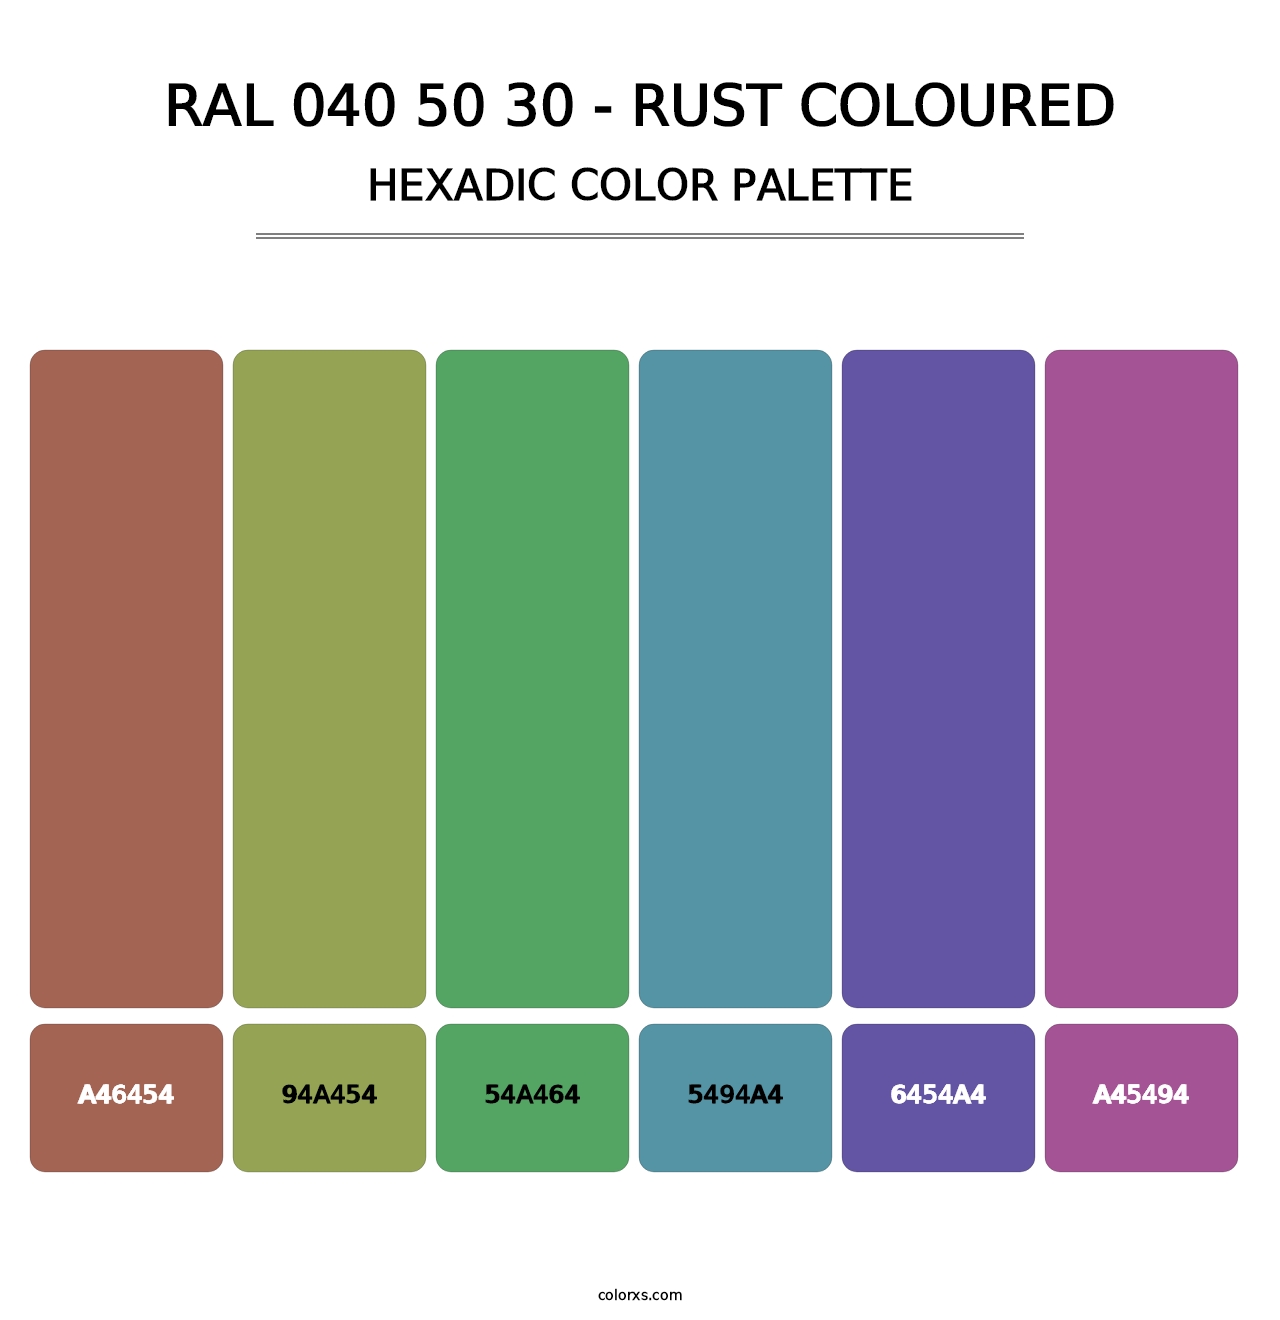 RAL 040 50 30 - Rust Coloured - Hexadic Color Palette